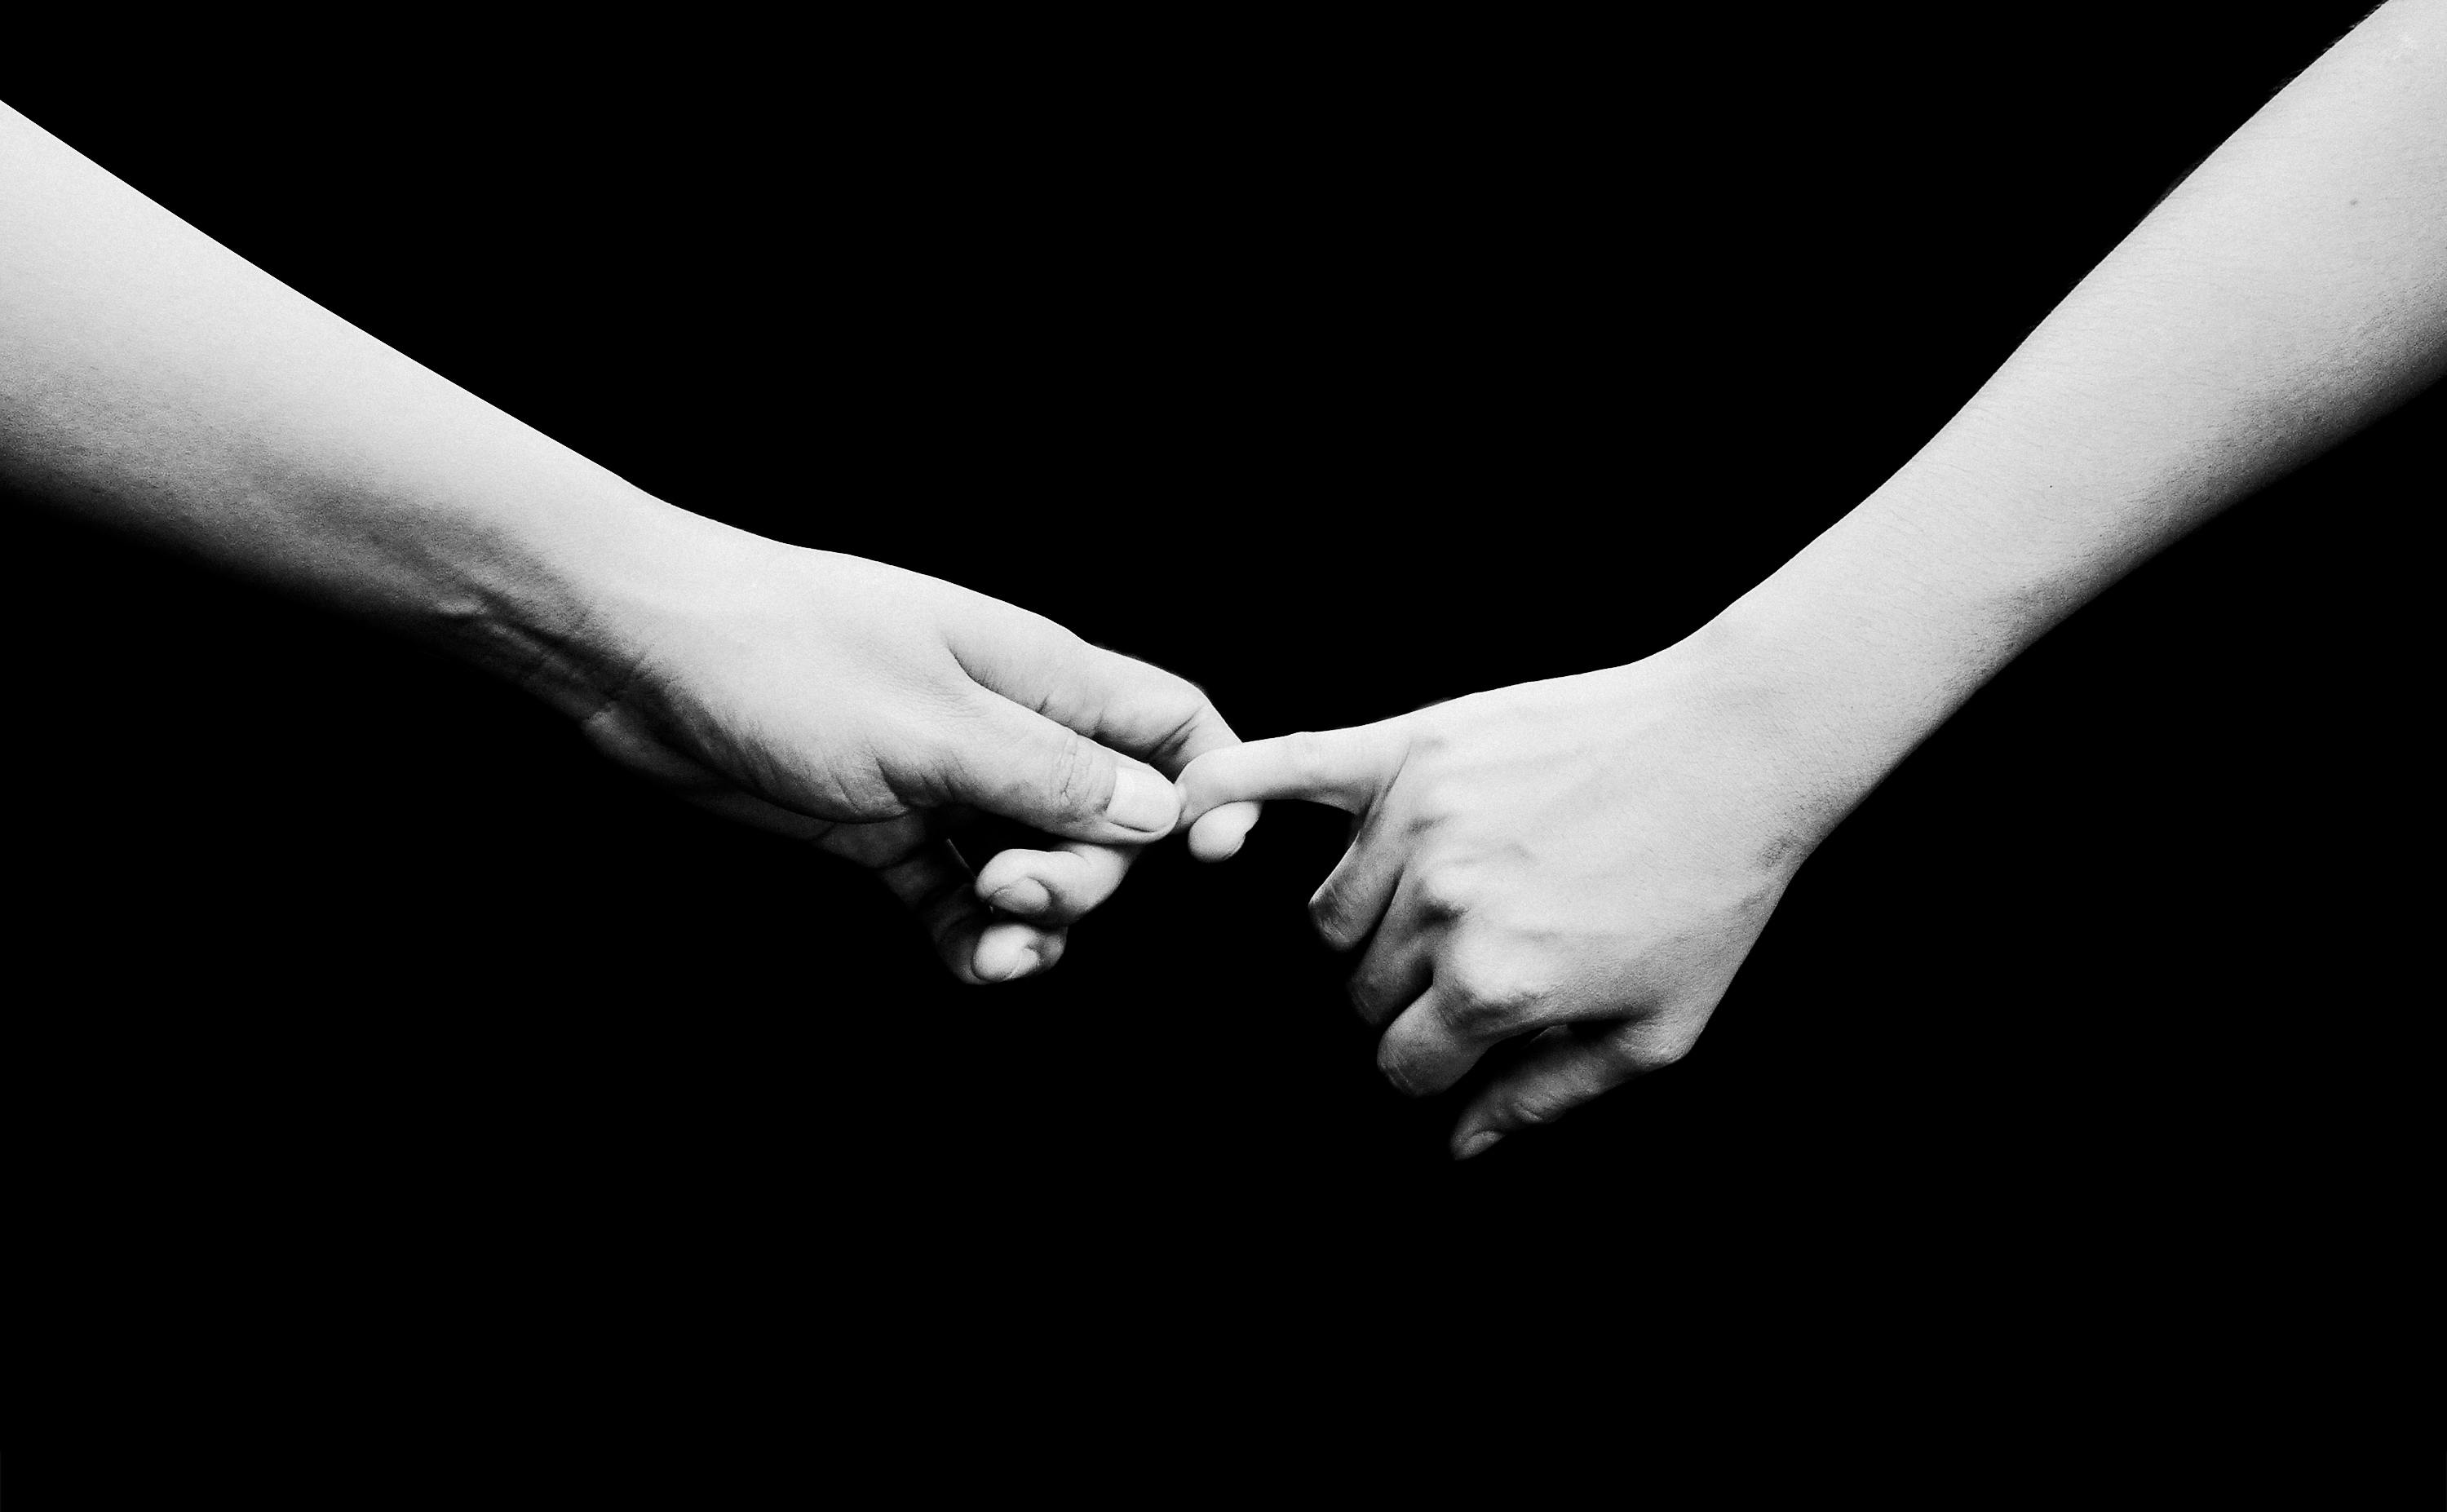 two people holding hands black and white